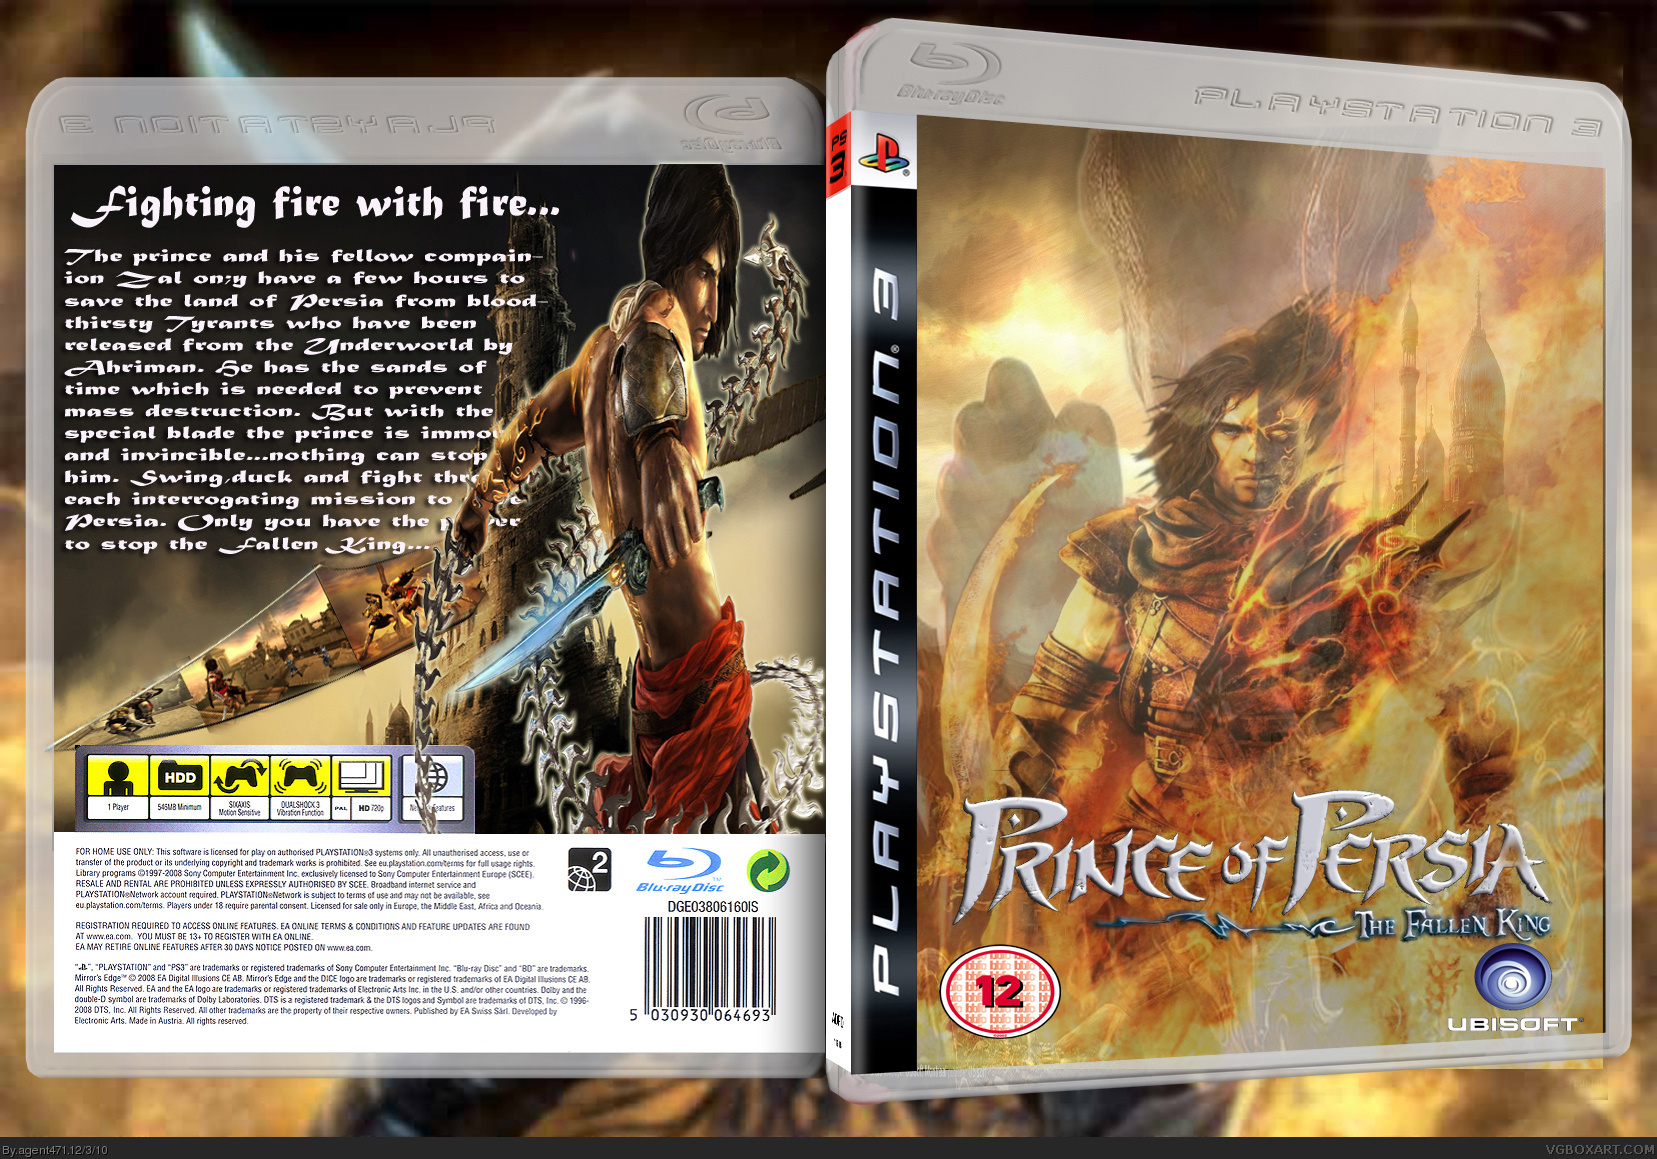 Prince of Persia: The Fallen King box cover